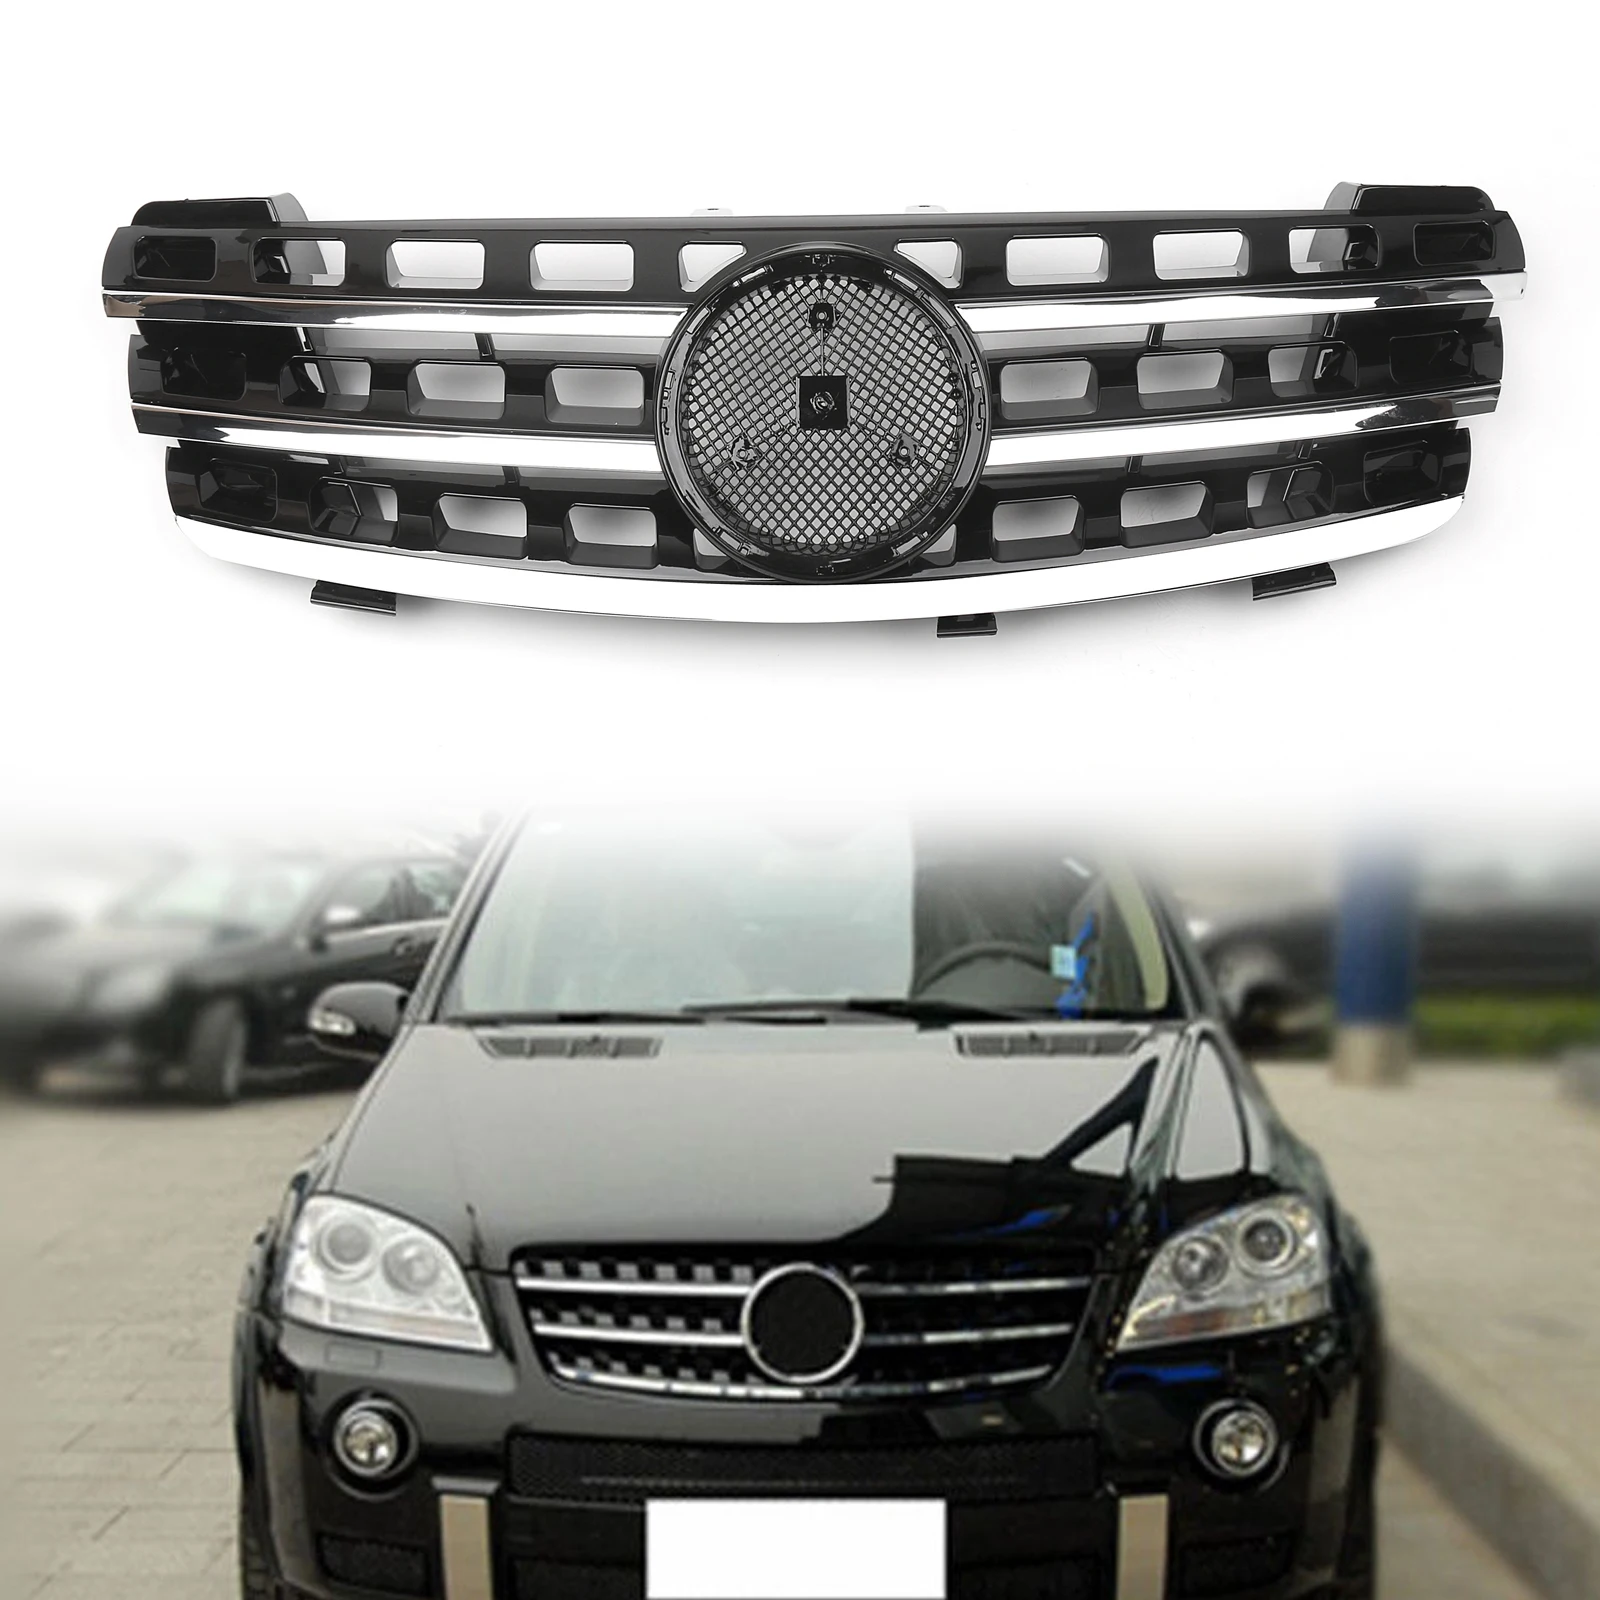 Tilpasning Årvågenhed Hurtig Wholesale Areyourshop 3 Fin Front Hood Sport Black Chrome Grill Grille For  Benz ML Class W164 2005 2006 2007 2008 With Decal From m.alibaba.com